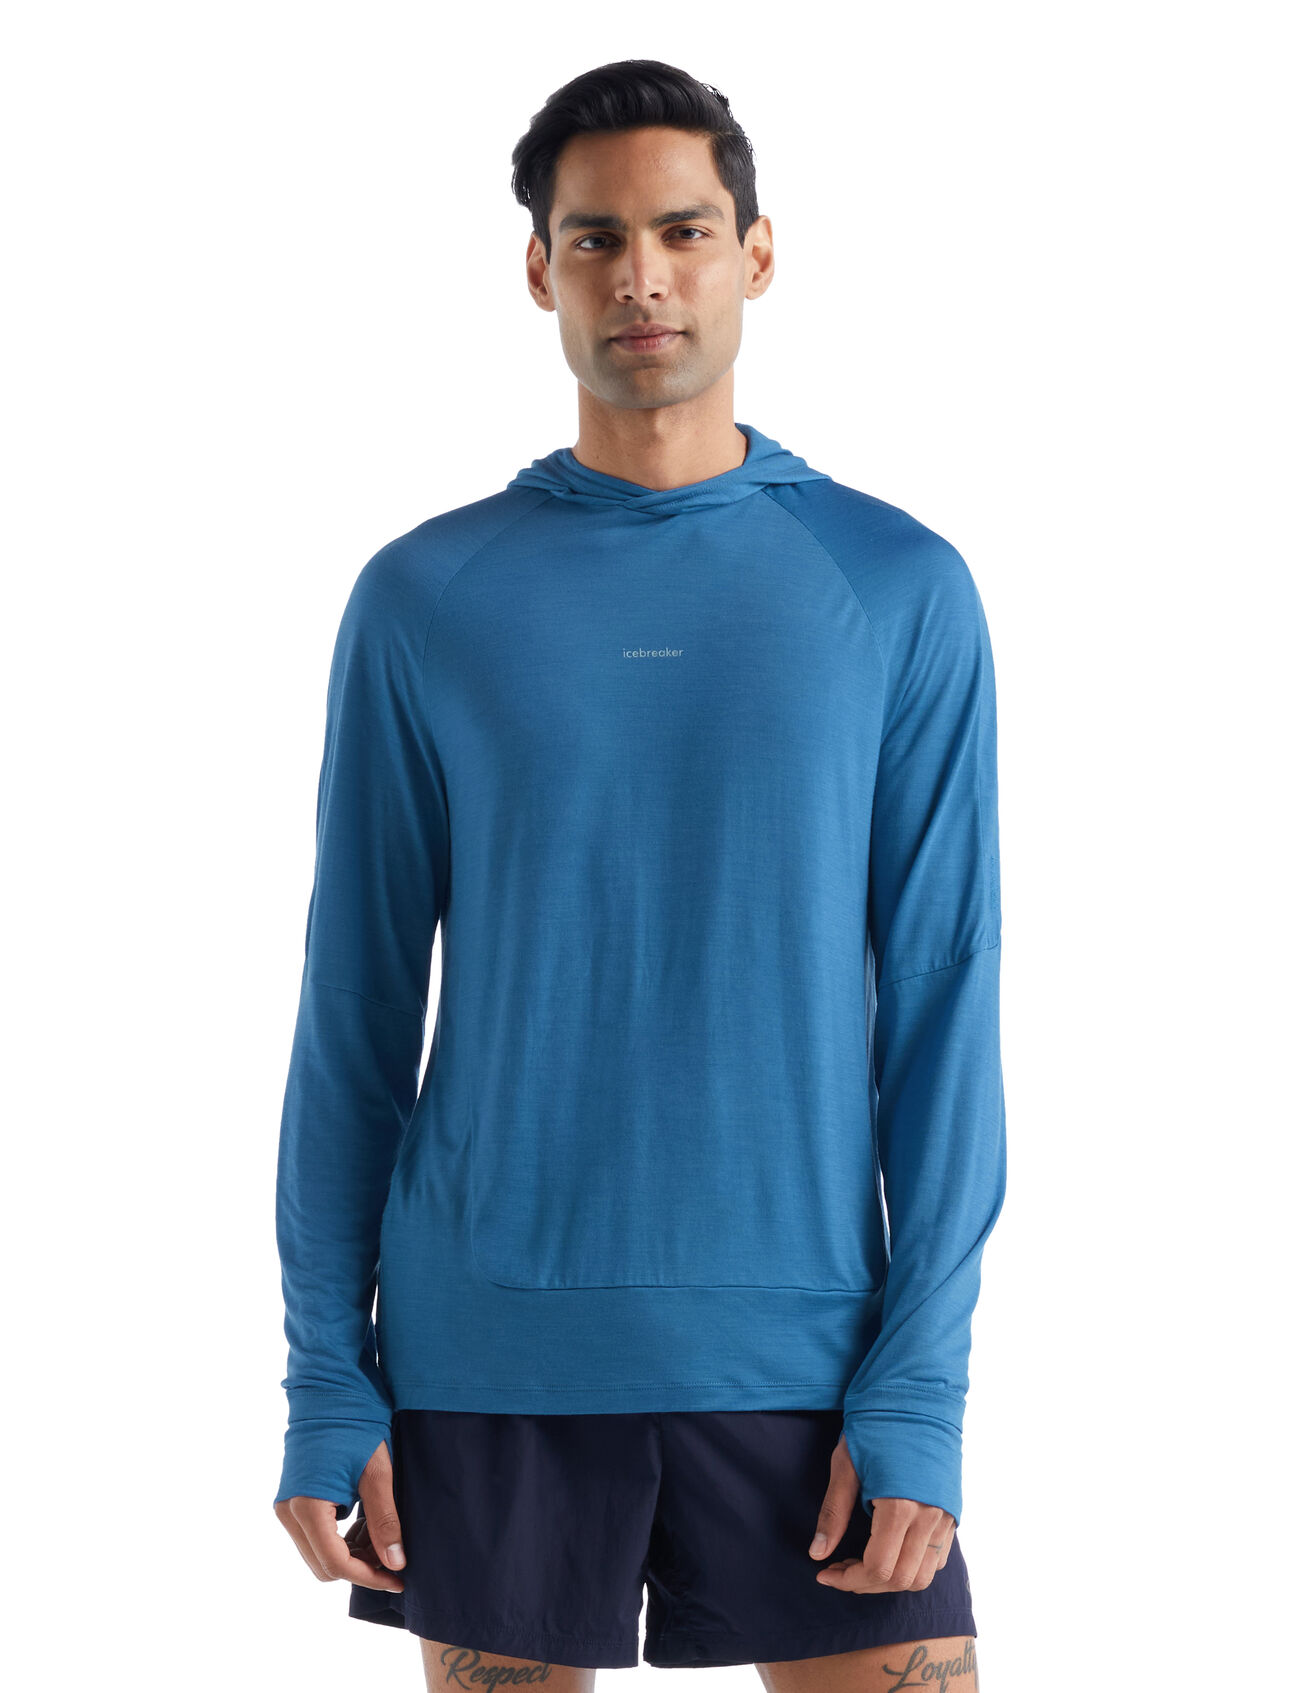 Mens 125 Cool-Lite™ Merino Blend Sphere Long Sleeve Hoodie A lightweight and breathable performance hoodie designed for aerobic days outside, the Cool-Lite™ Hoodie features our moisture-wicking Cool-Lite™ merino jersey fabric.